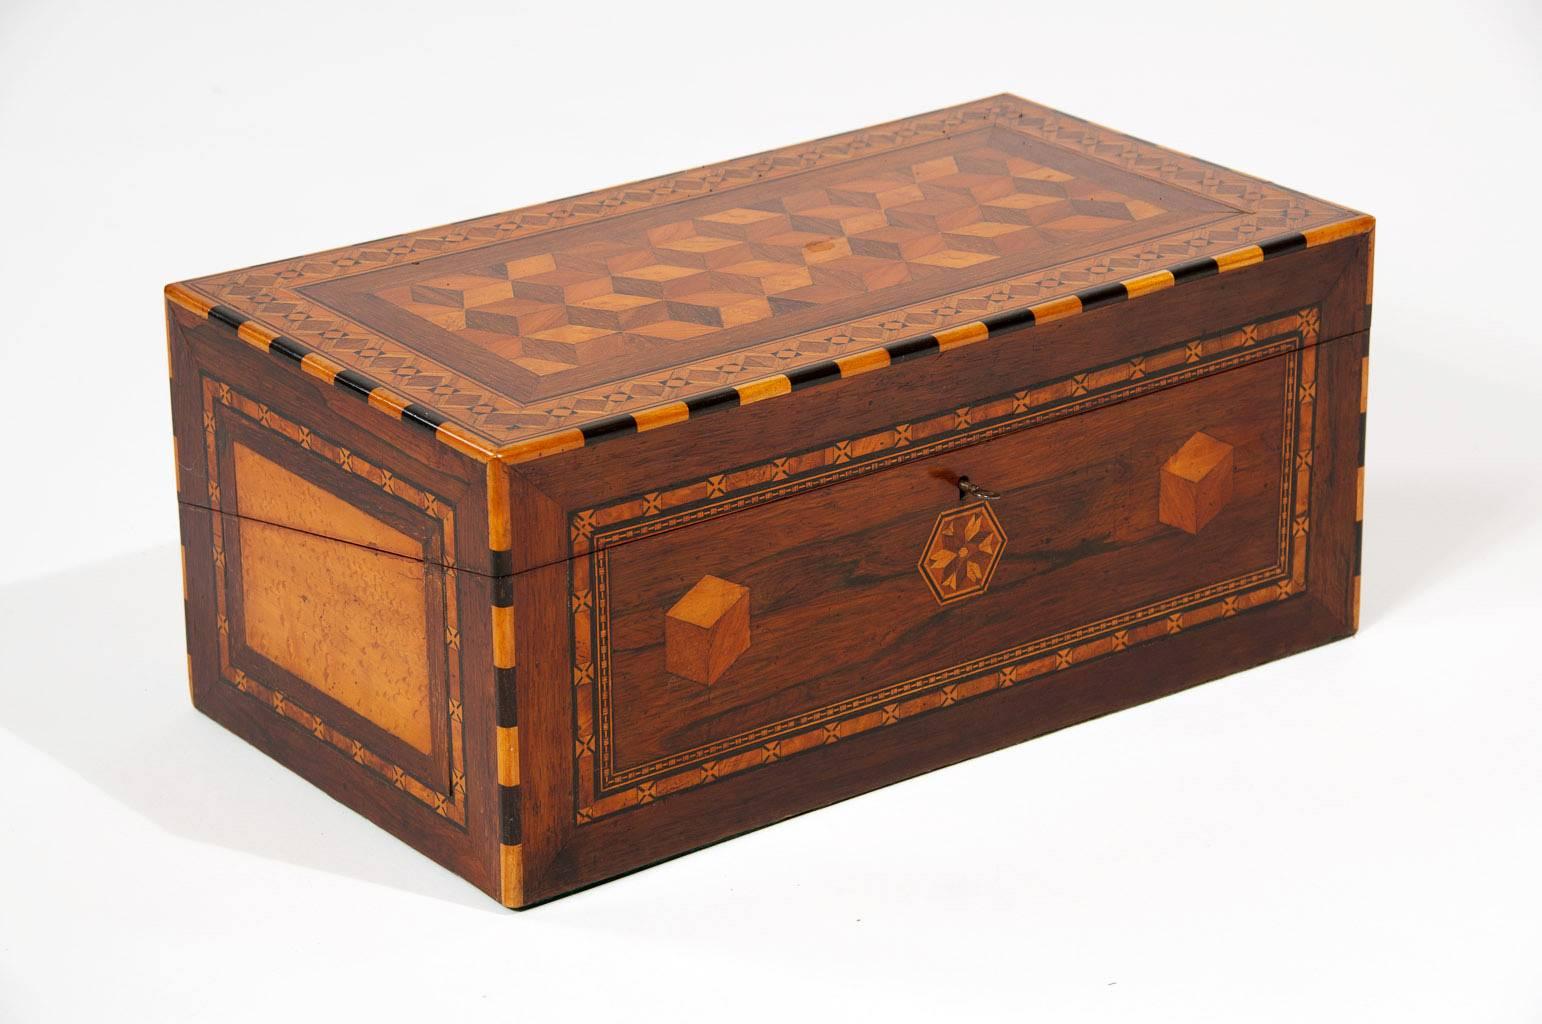 An exceptionally good quality 19th century geometric marquetry and parquetry writing slope of good size and proportions. This well sized mid 19th century writing slope / box has been made to highest standard with extremely fine parquetry and use of